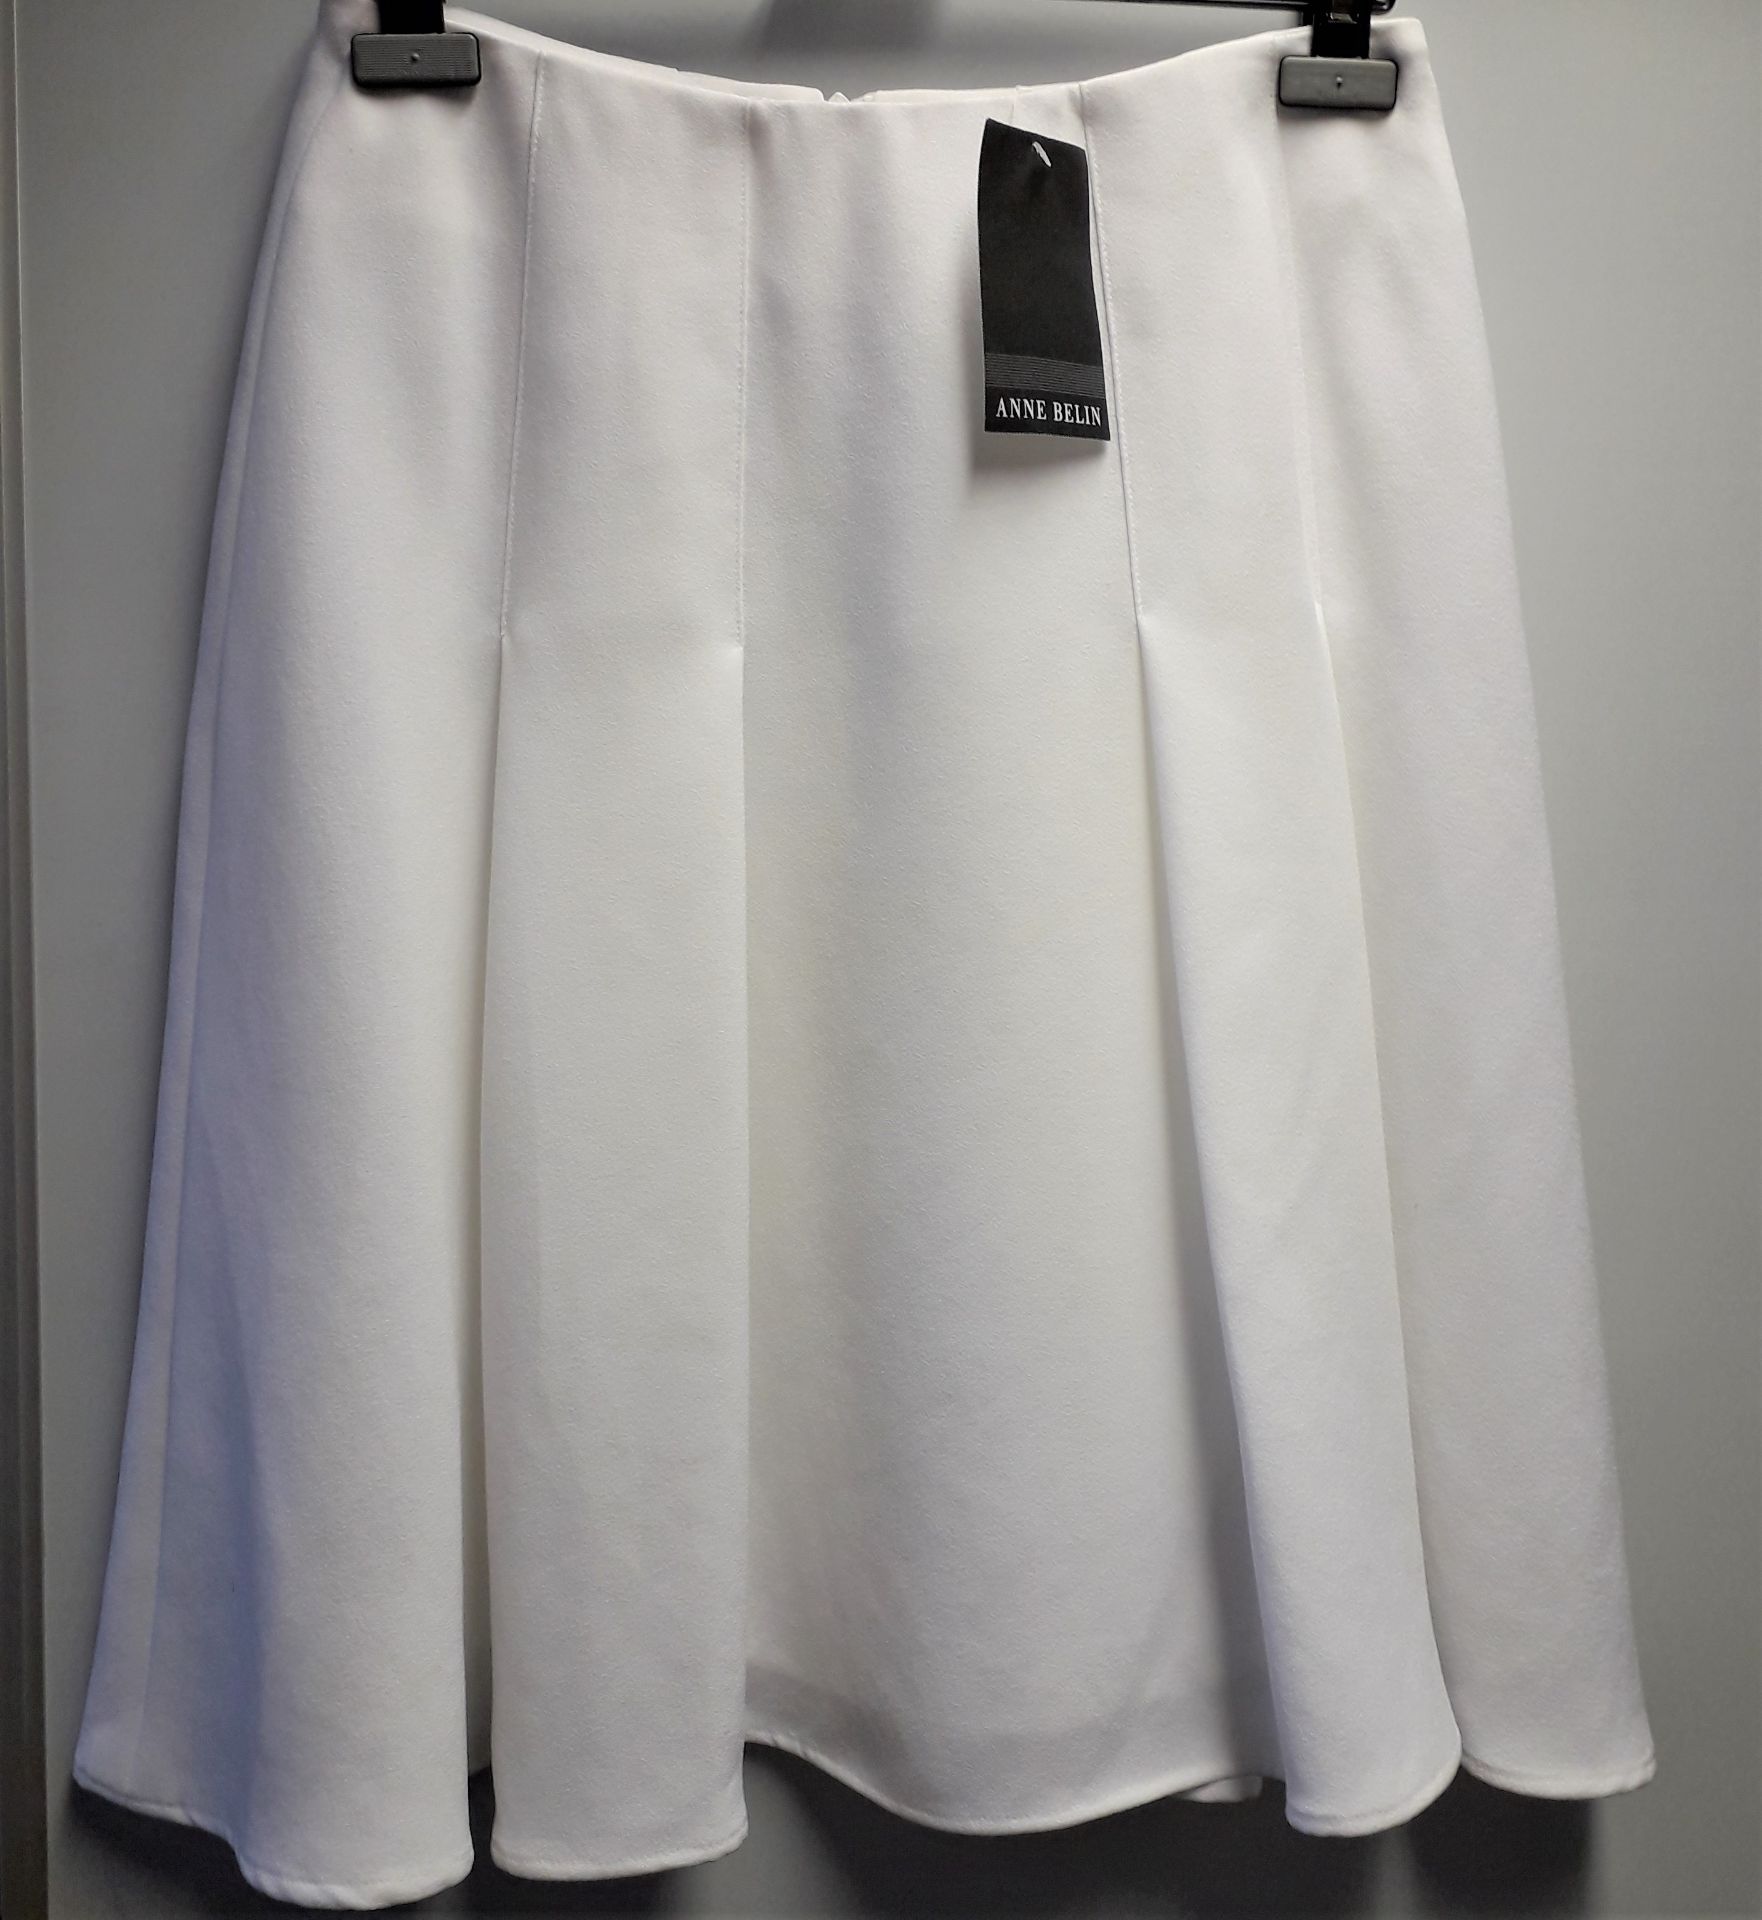 1 x Anne Belin Cream White Box Pleated Skirt - Size: 14 - Material: 100% Polyester - From a High End